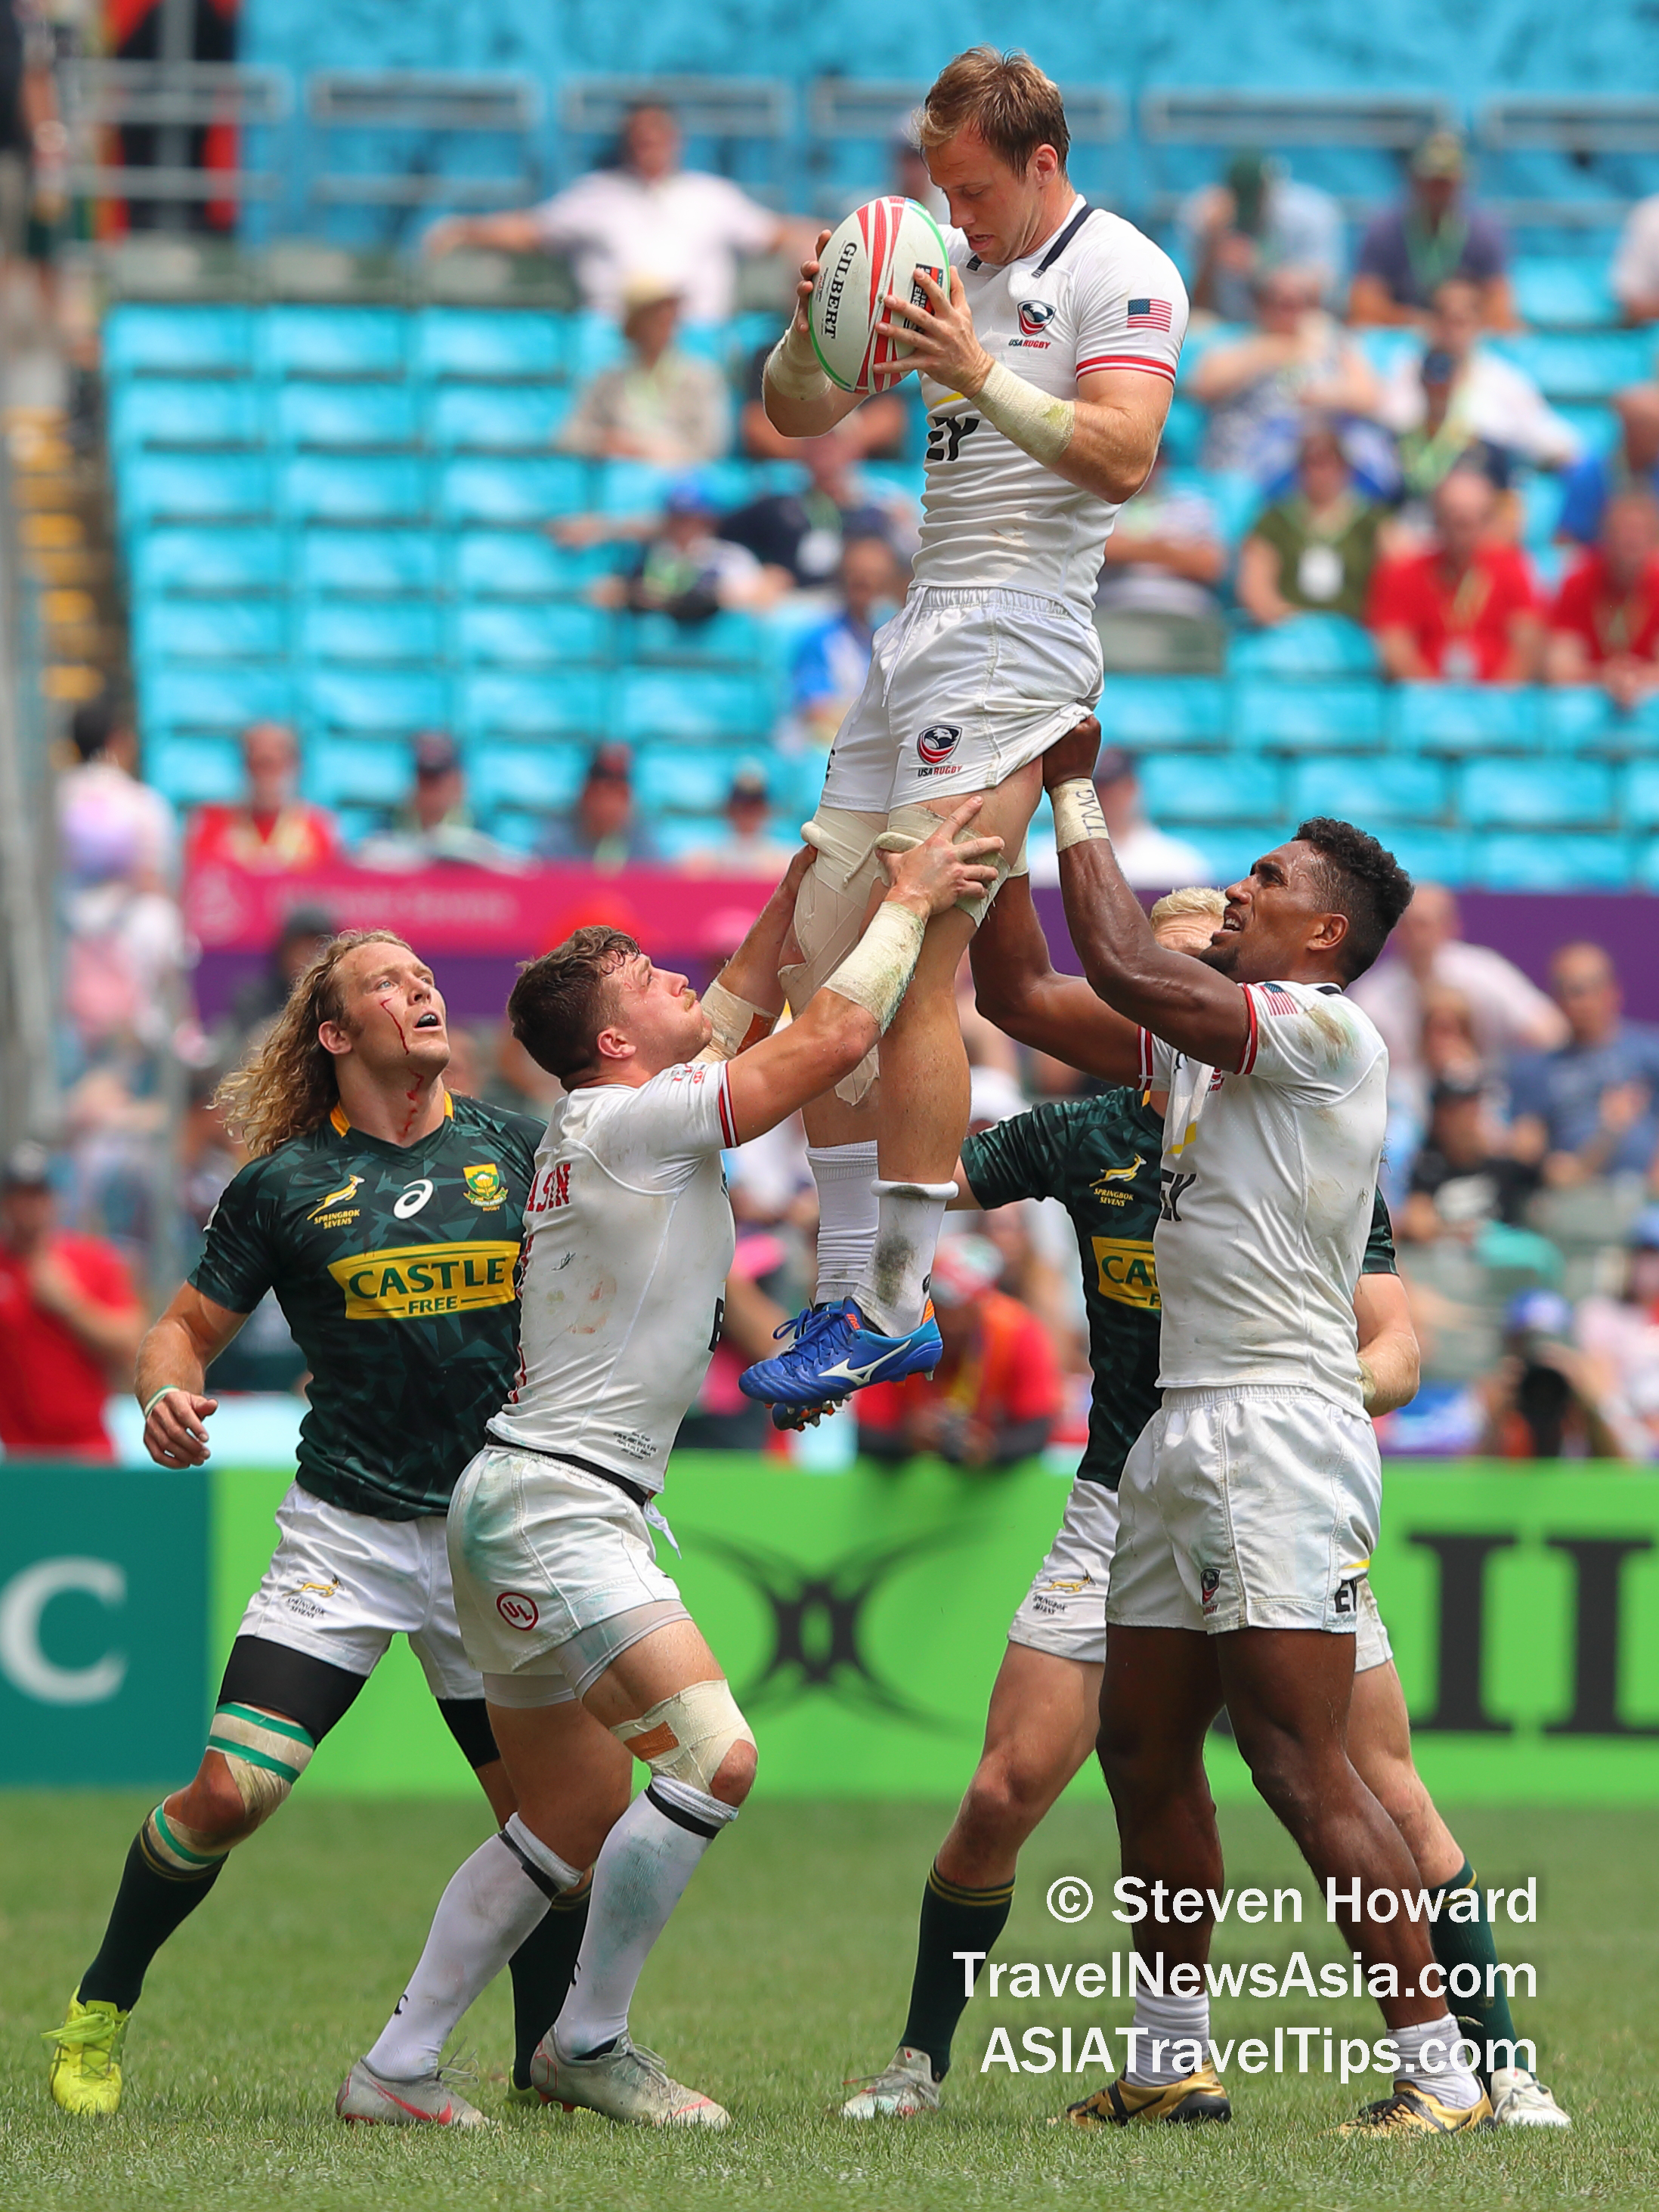 Pictures from 2019 Cathay Pacific / HSBC Hong Kong Sevens